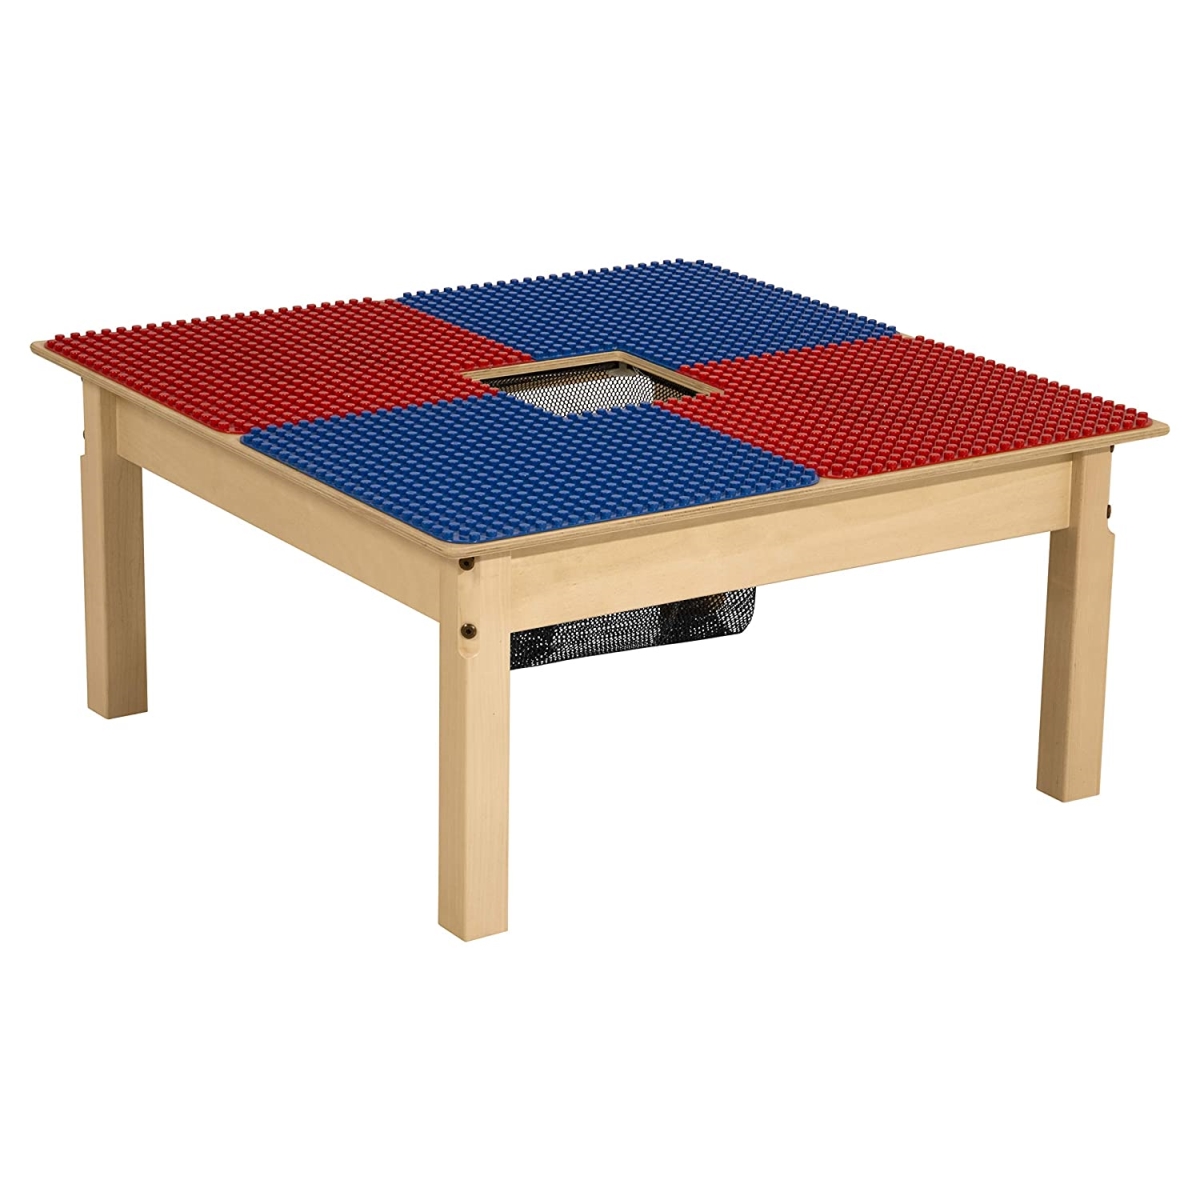 Tp3131pgn14-br 14 In. Duplo Compatible Table With Legs, Blue & Red - Square